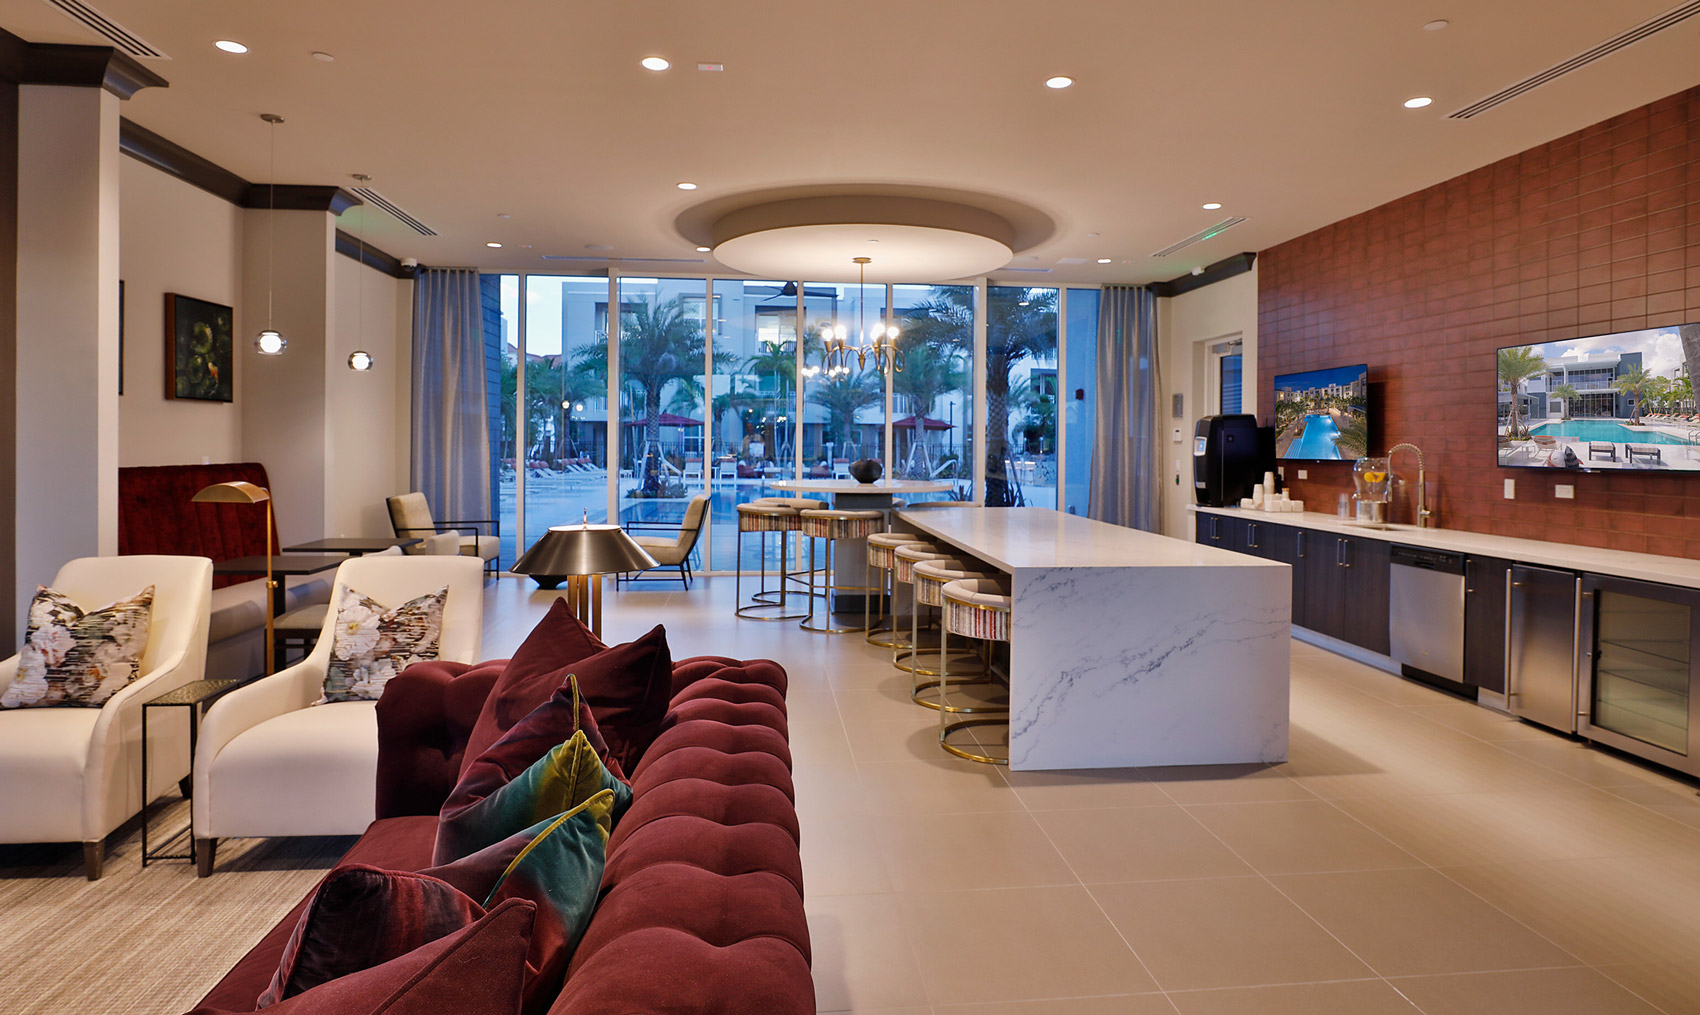 interior clubhouse area with table and bar seating, large tv, decor, and decorative lighting with view of the coffee bar